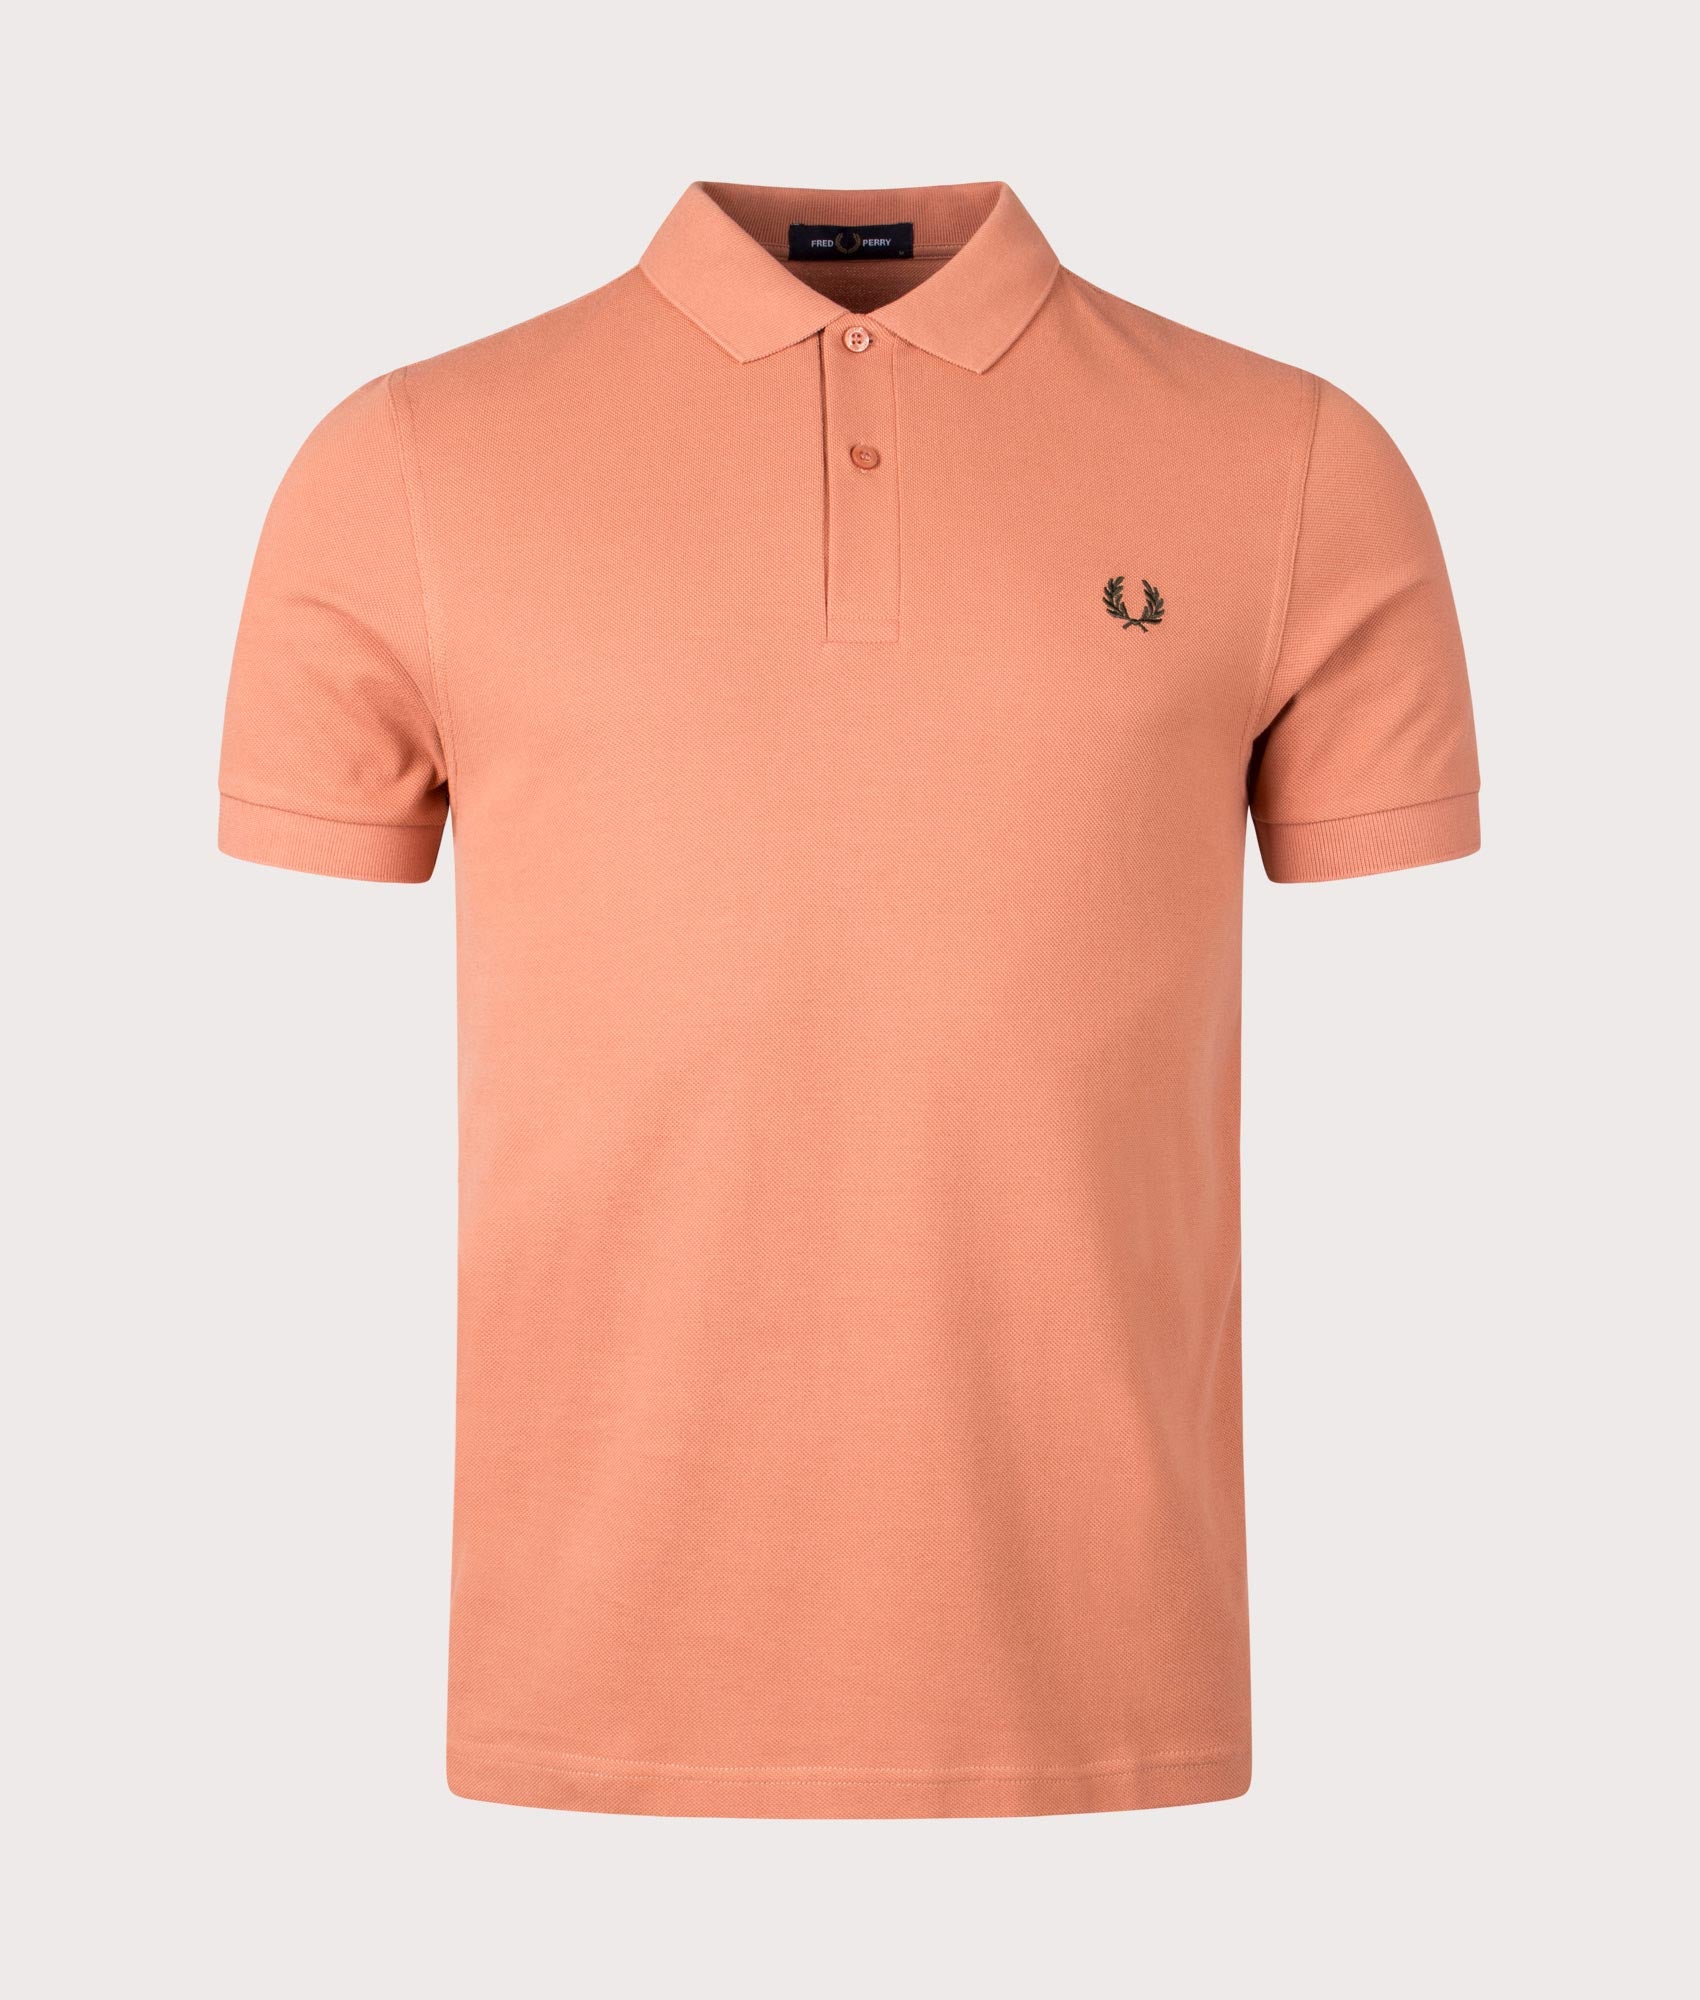 Fred Perry Mens M6000 Polo Shirt - Colour: R43 Light Rust/Night Green - Size: Medium